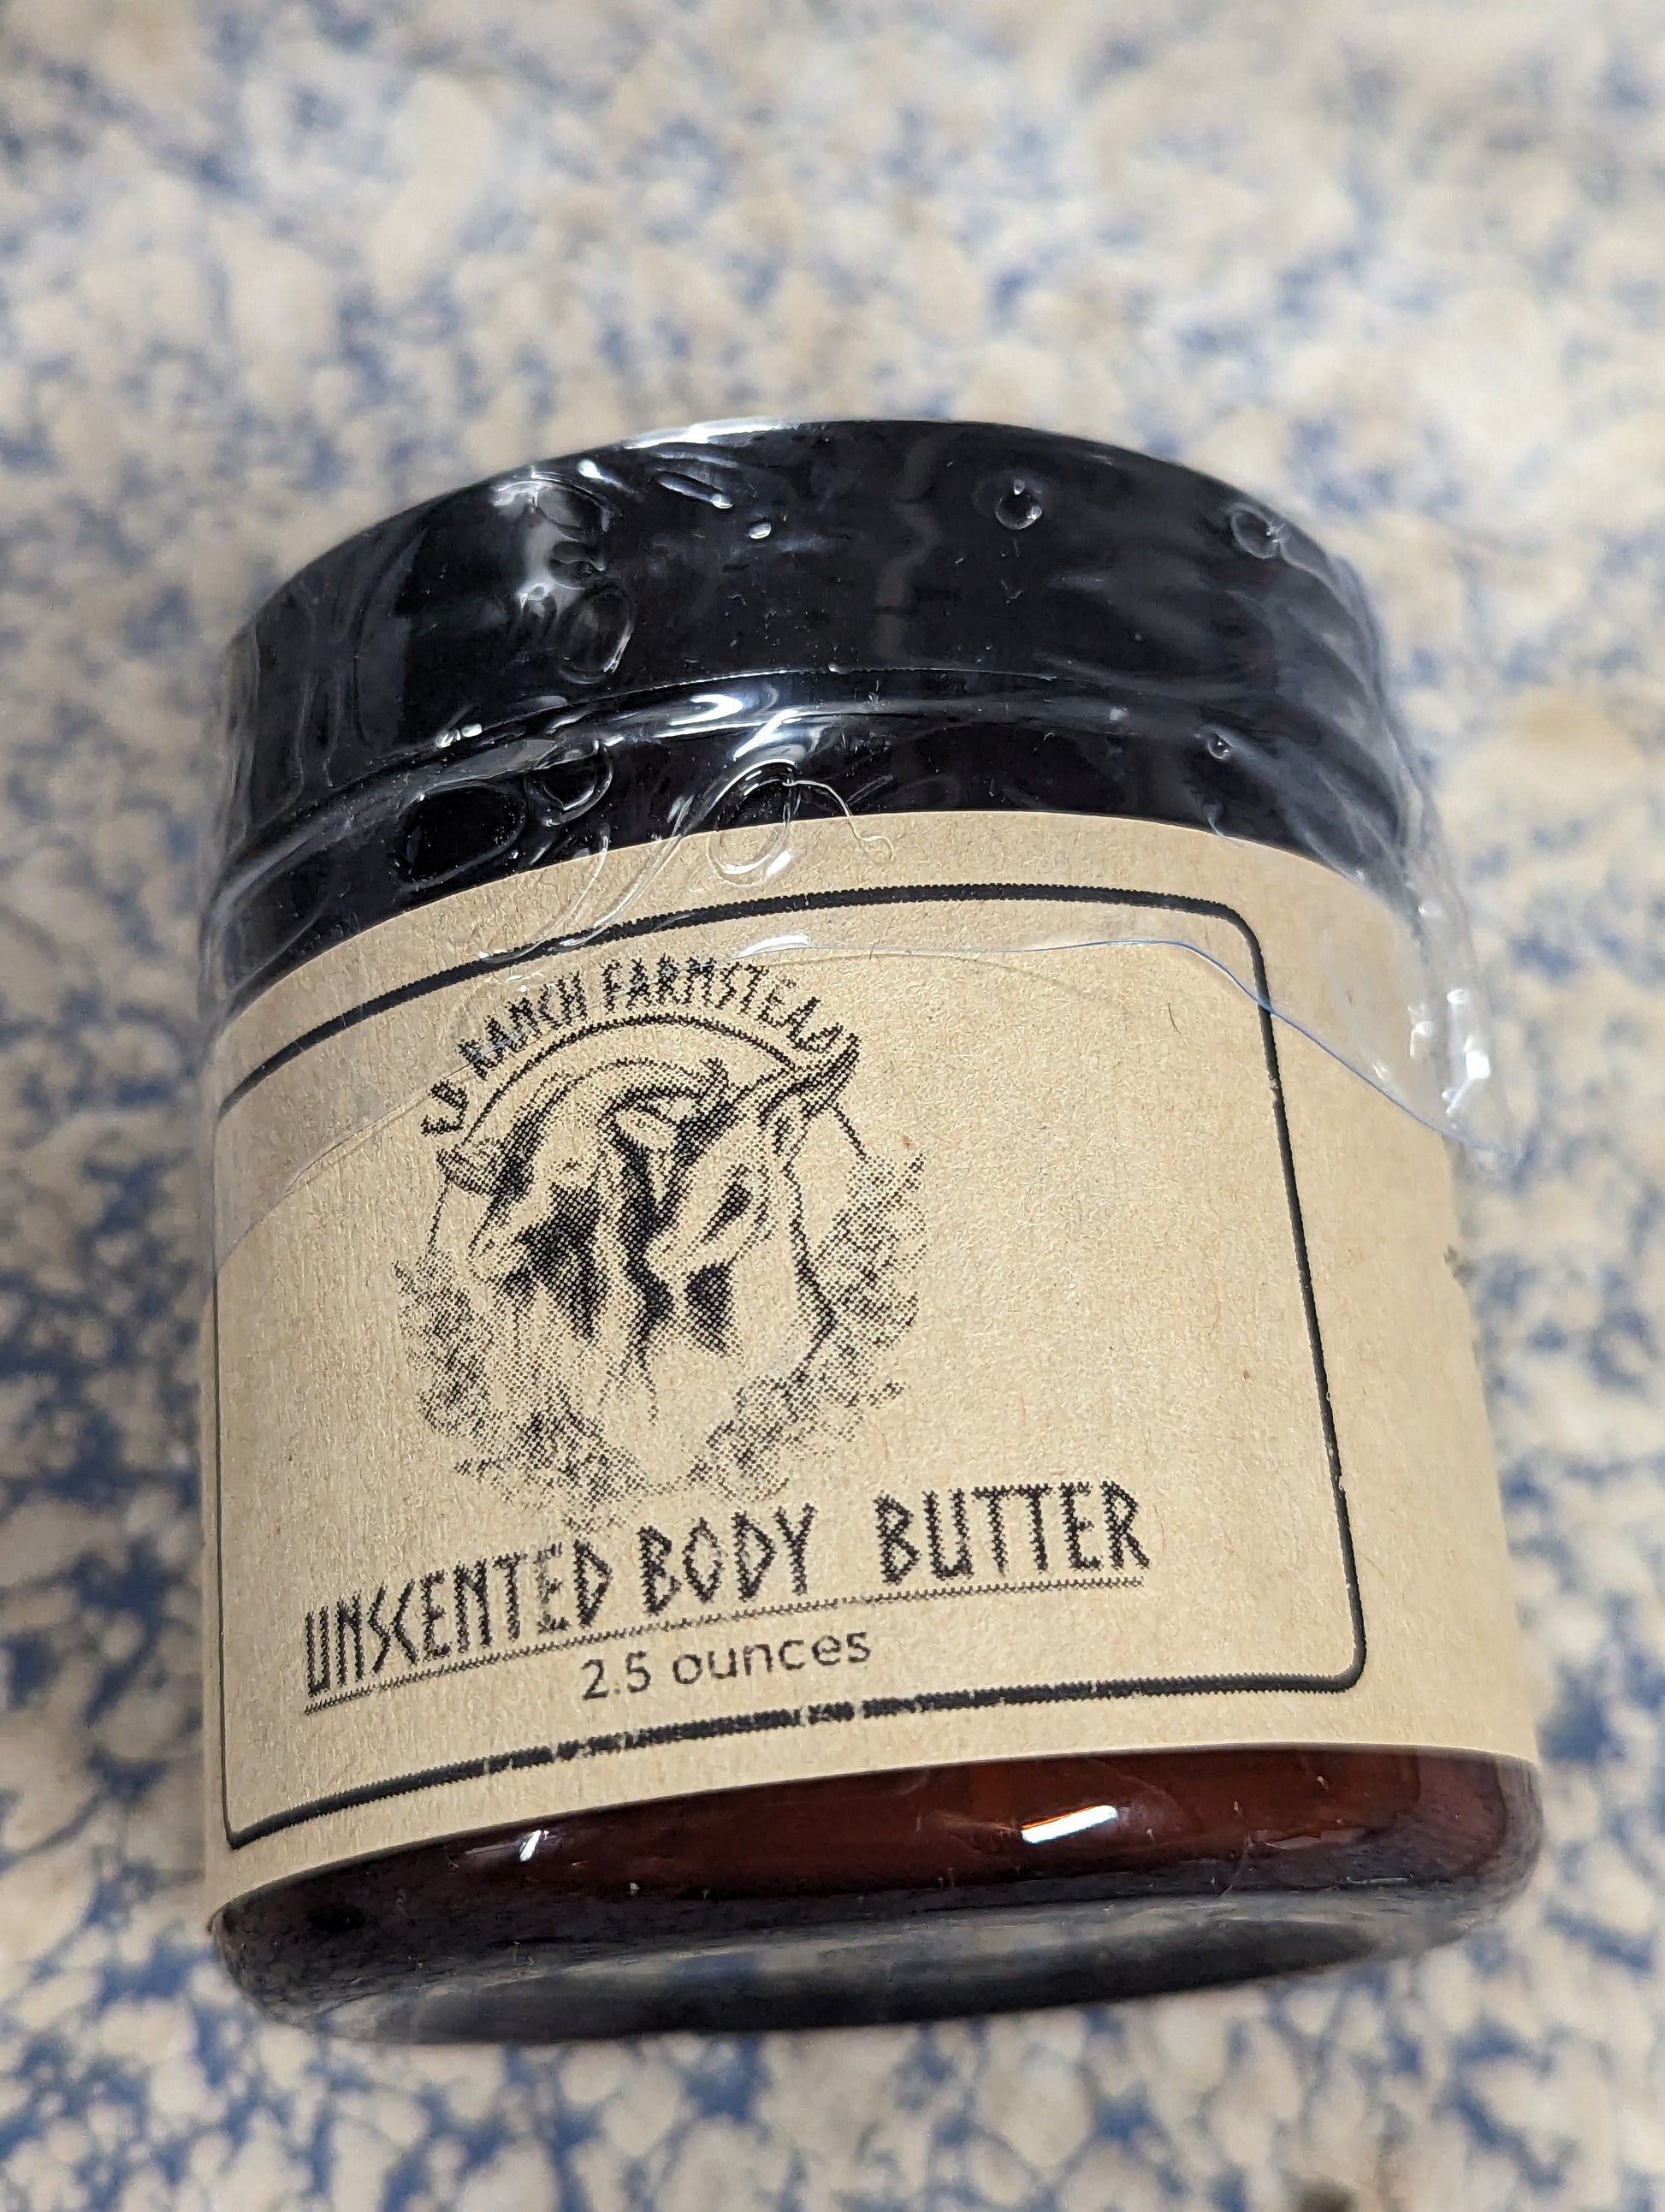 unscented body butter, all natural body butter, all natural body care, eco friendly body care, simple body care, natural body care, whipped body butter near me, body butter near me